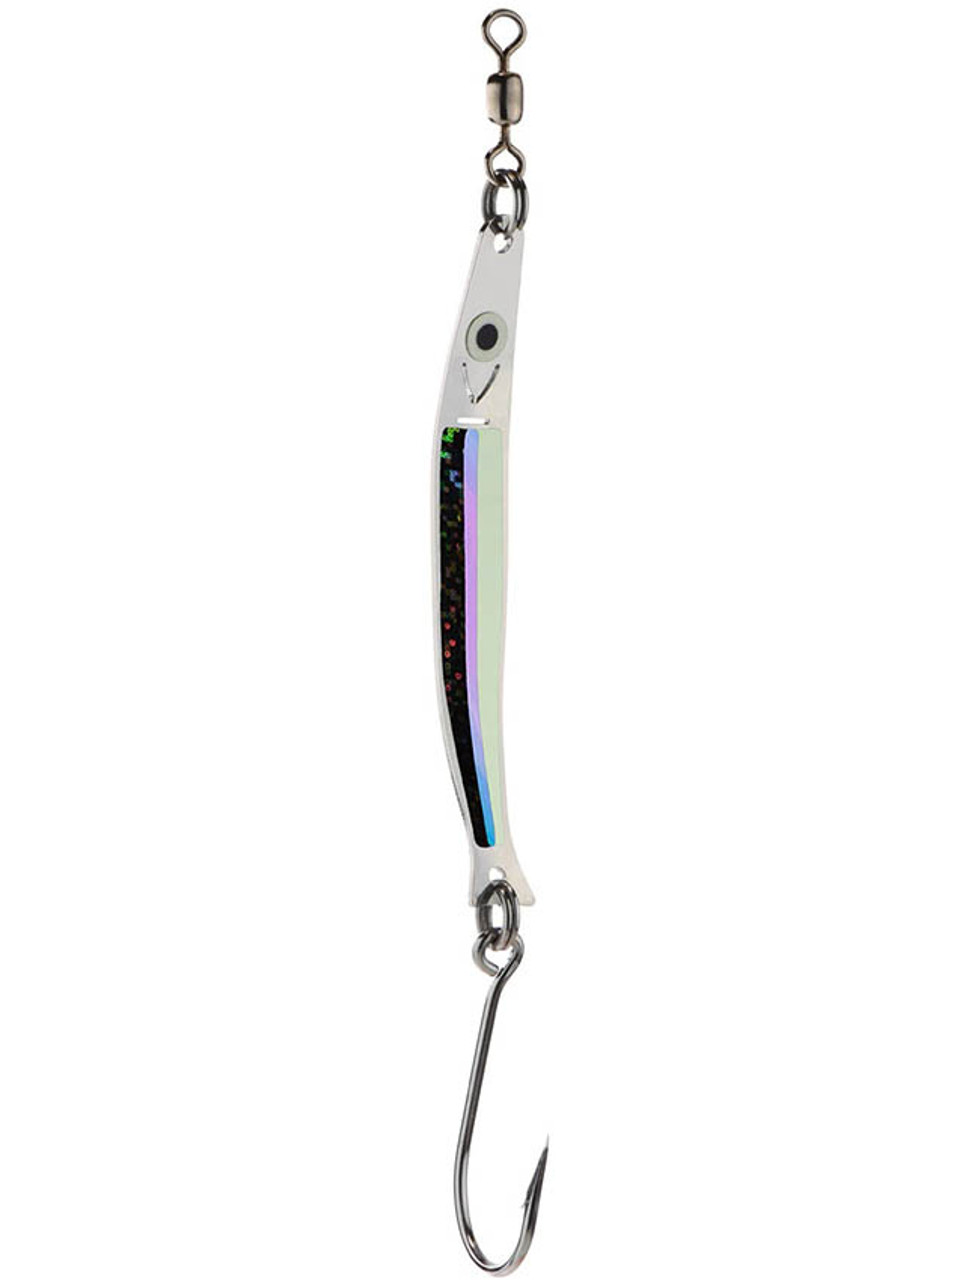 My Top 5 Saltwater Lures for Inshore Gamefish - 727 Angler